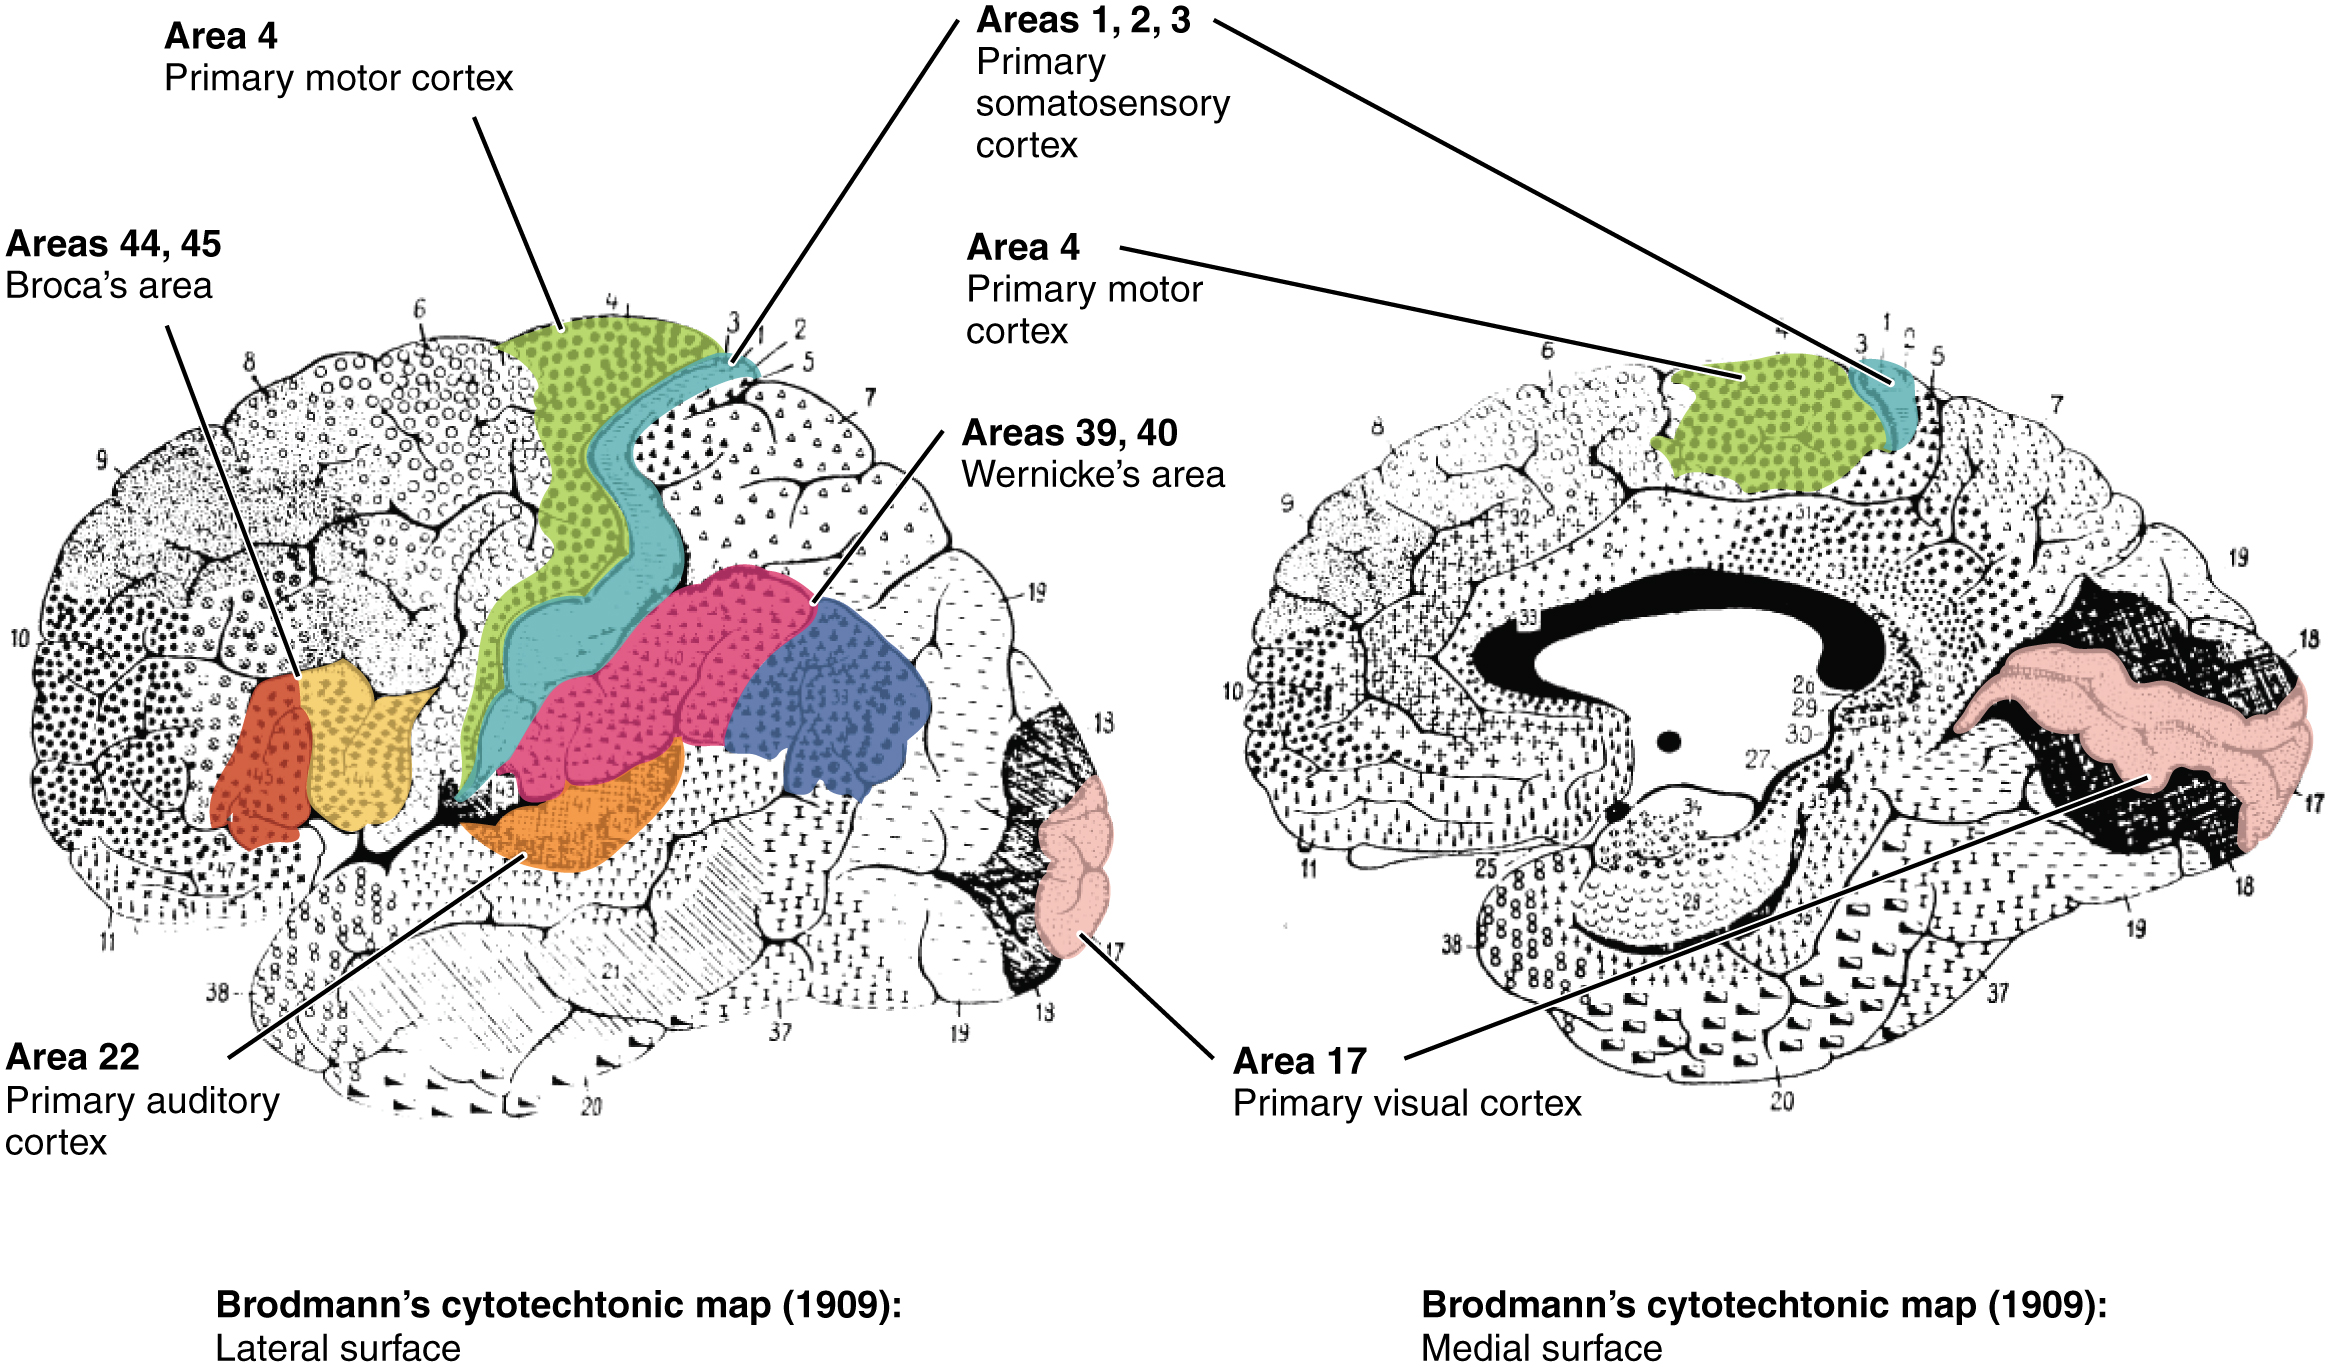 This figure shows a brain with the different regions highlighted in different colors. The left panel shows the lateral surface of the brain. The right panel shows the medial surface of the brain. The same color scheme is used to identify the different regions in both panels.